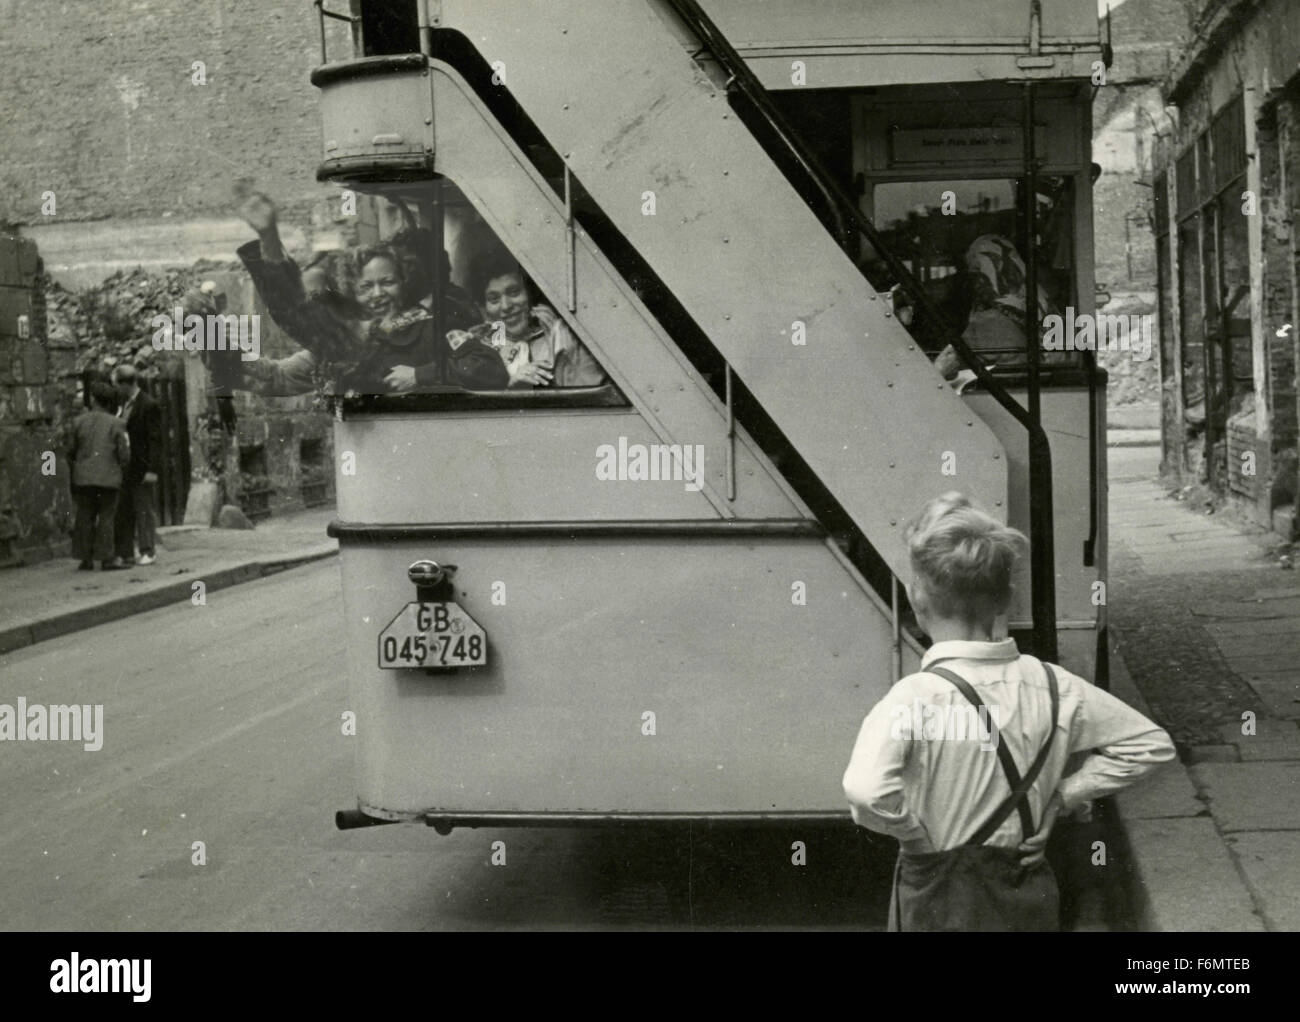 A bus in Berlin after World War II, Germany Stock Photo